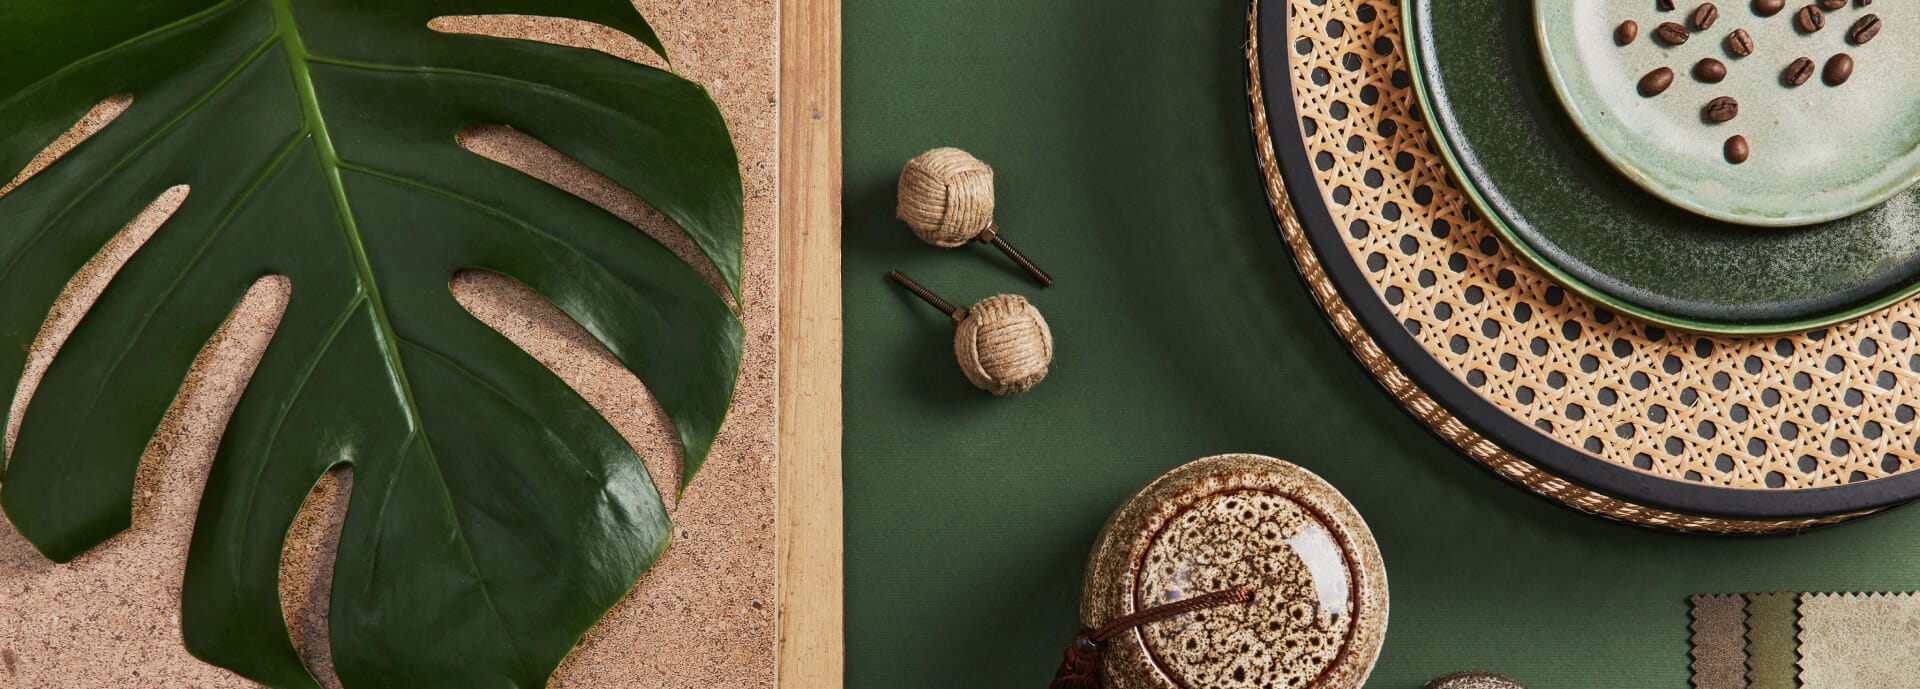 Green and tan stylish flat lay with a monstera leave and other small items | Good UX